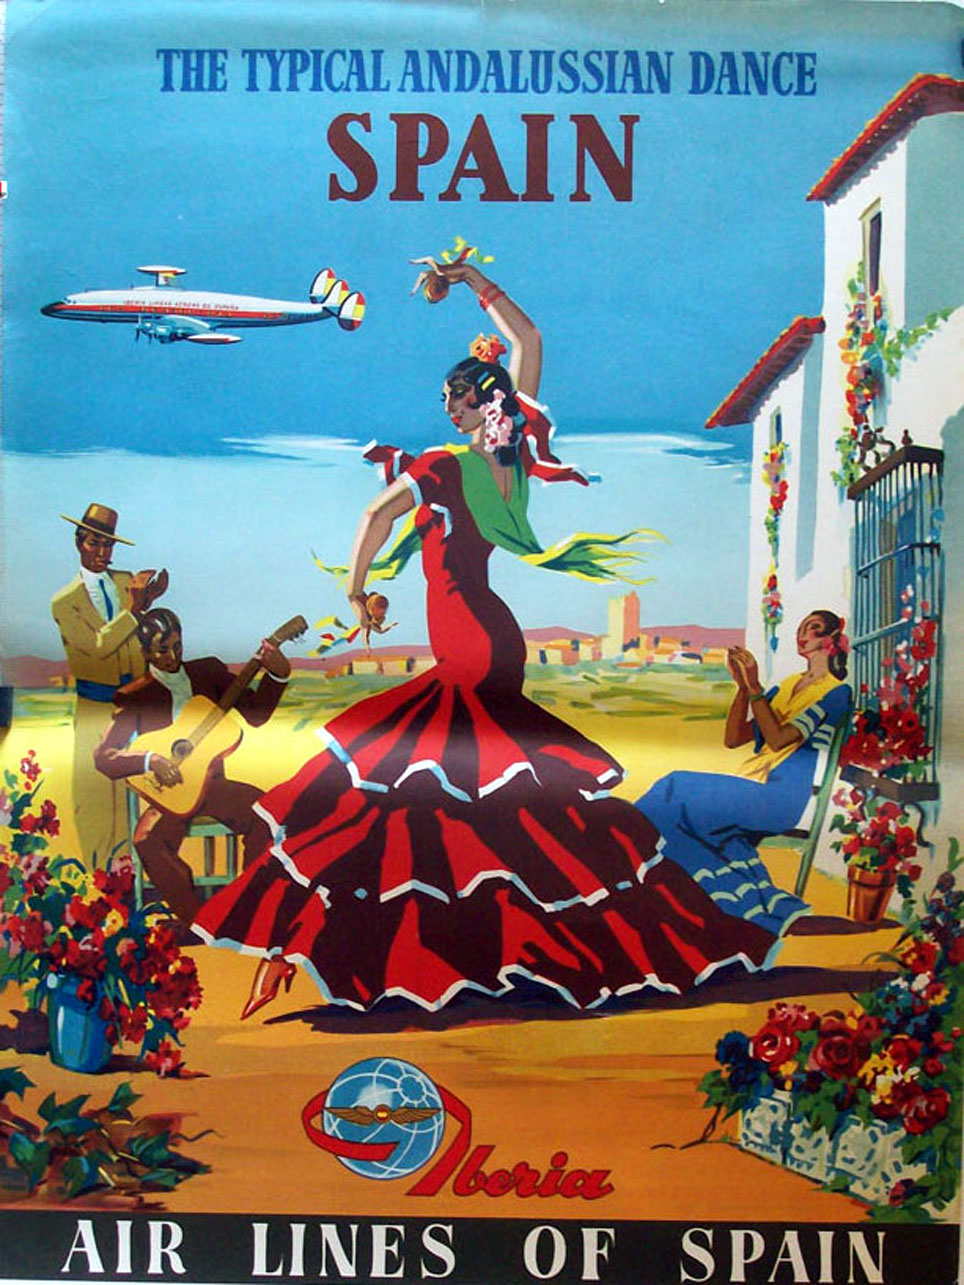 THE TYPICAL ANDALUSSIAN DANCE. IBERIA